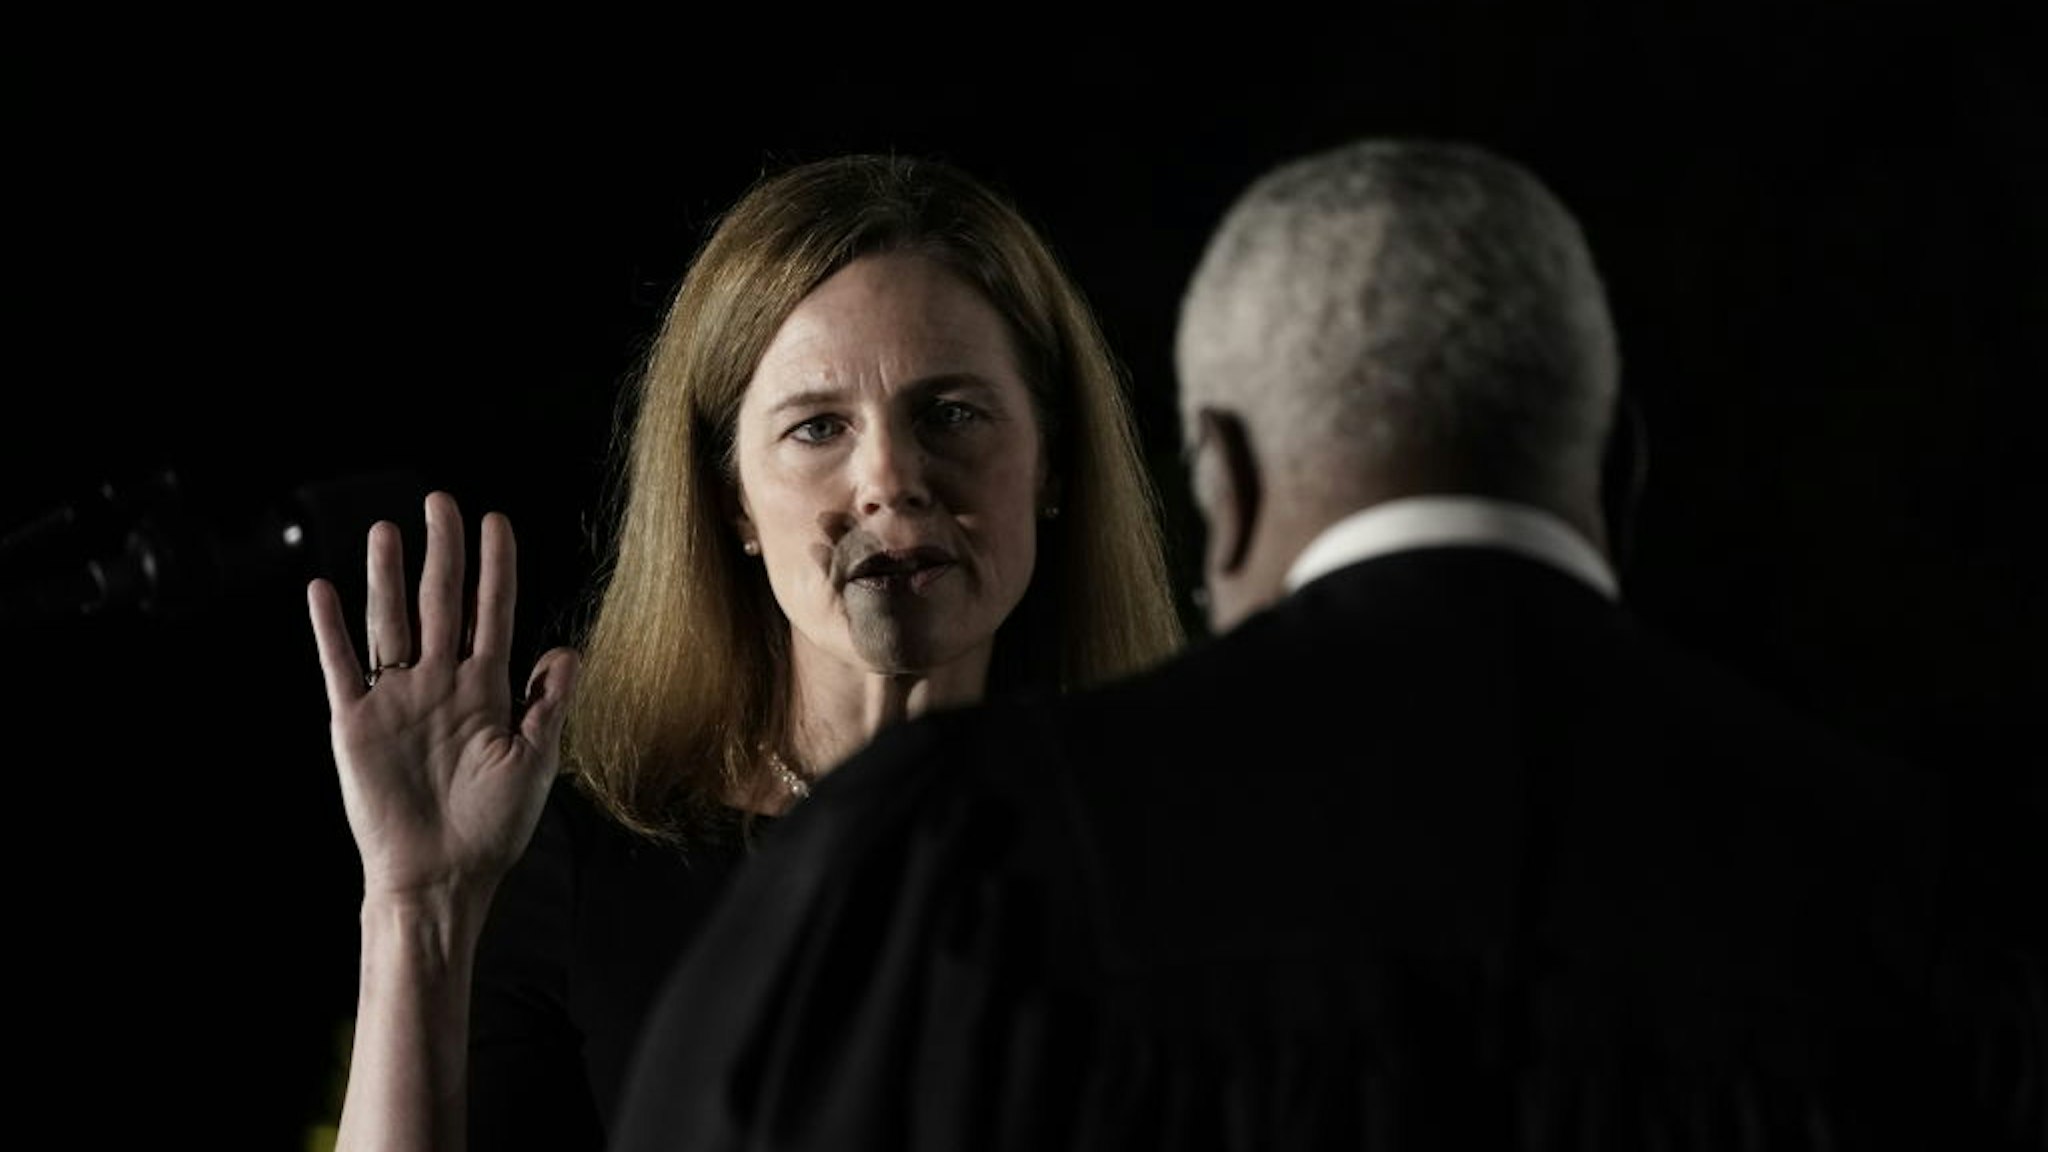 Clarence Thomas, associate justice of the U.S. Supreme Court, right, administers the judicial oath to Amy Coney Barrett, associate justice of the U.S. Supreme Court, during a ceremony on the South Lawn of the White House in Washington, D.C.,